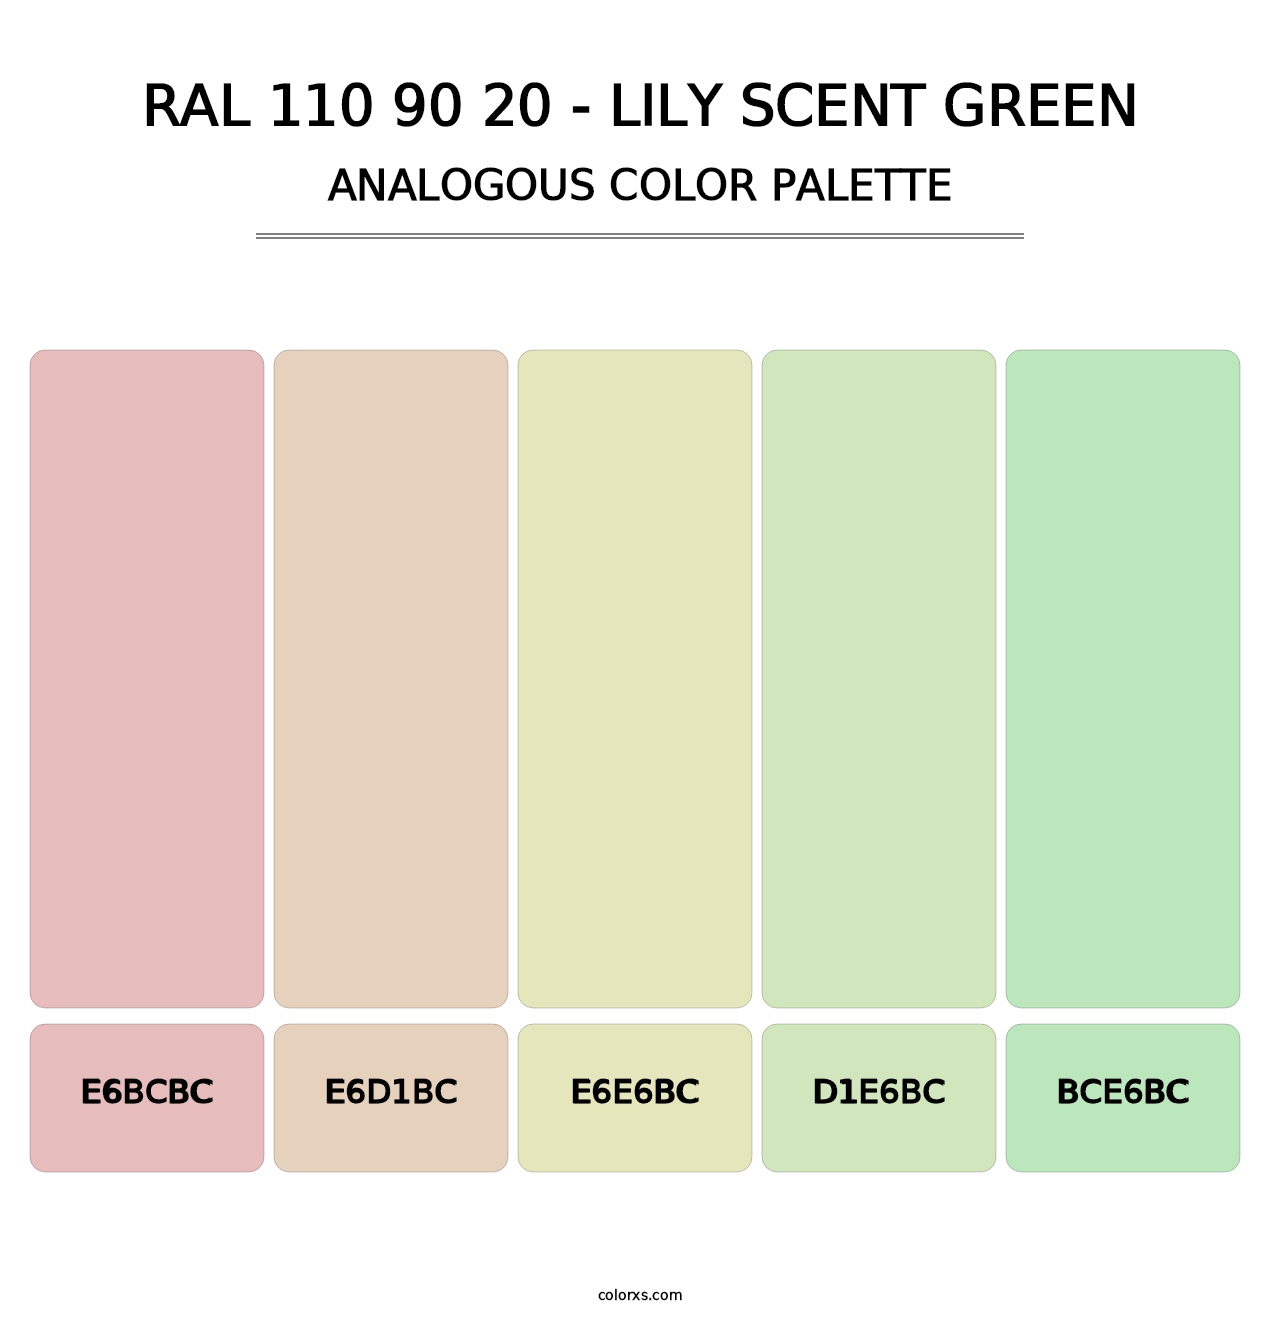 RAL 110 90 20 - Lily Scent Green - Analogous Color Palette